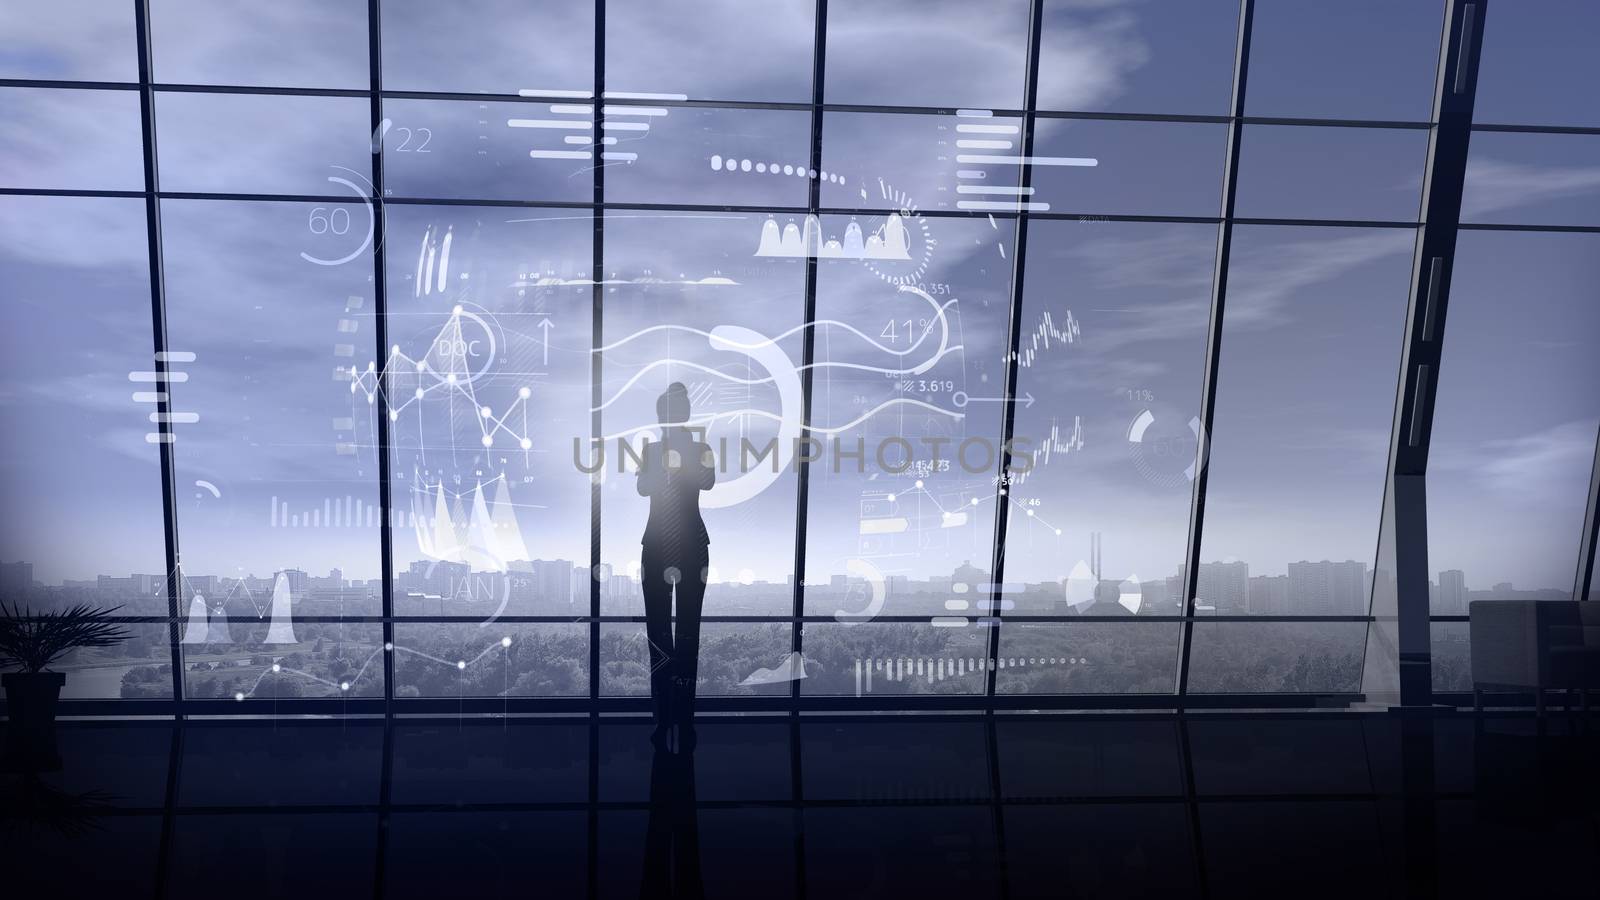 Silhouette of a business woman against the background of an office window surrounded by an array of data in virtual reality.